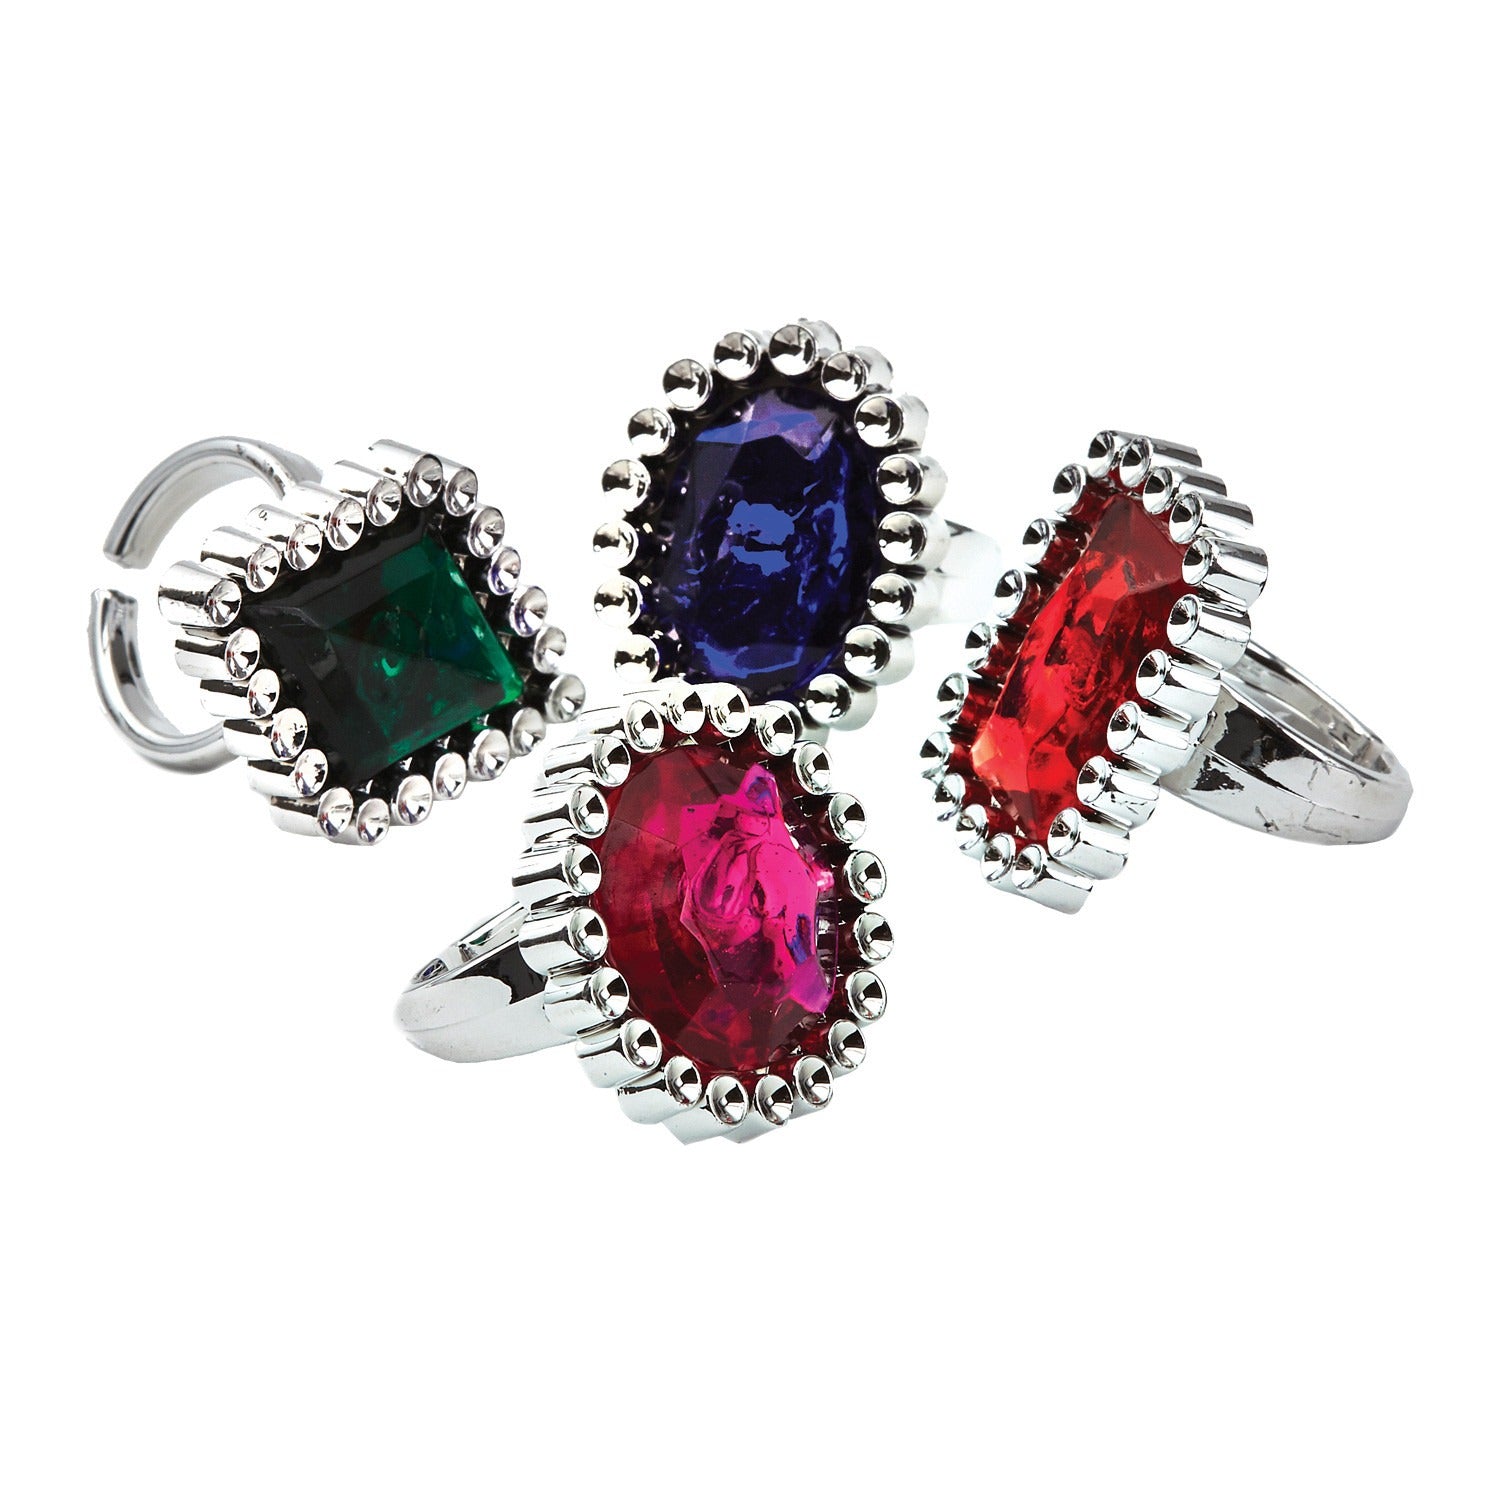 View Jewel Ring information